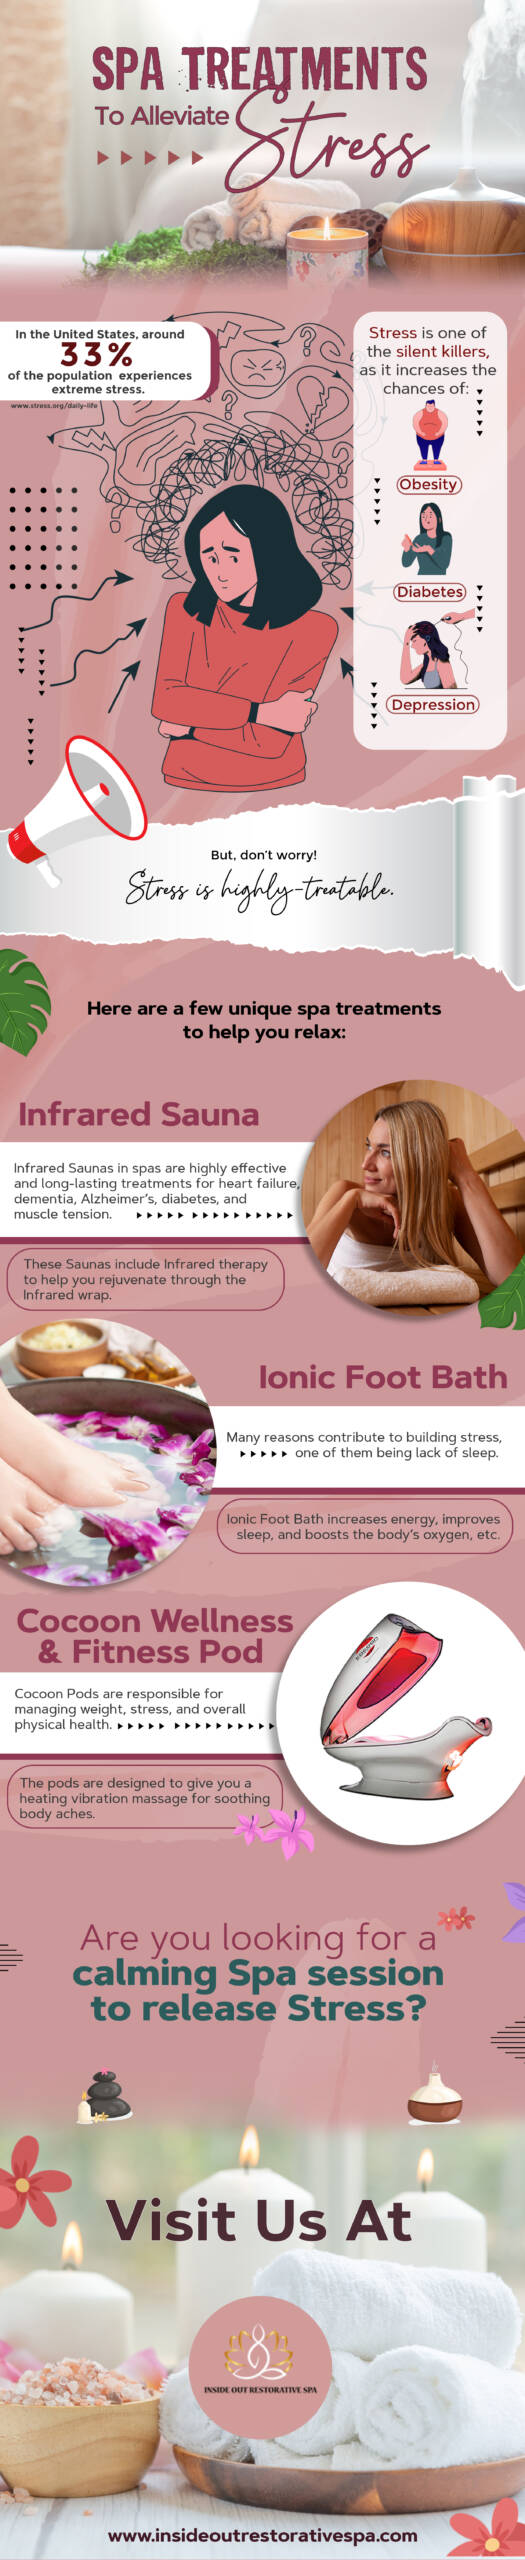 Spa Treatments To Alleviate Stress - Infograph